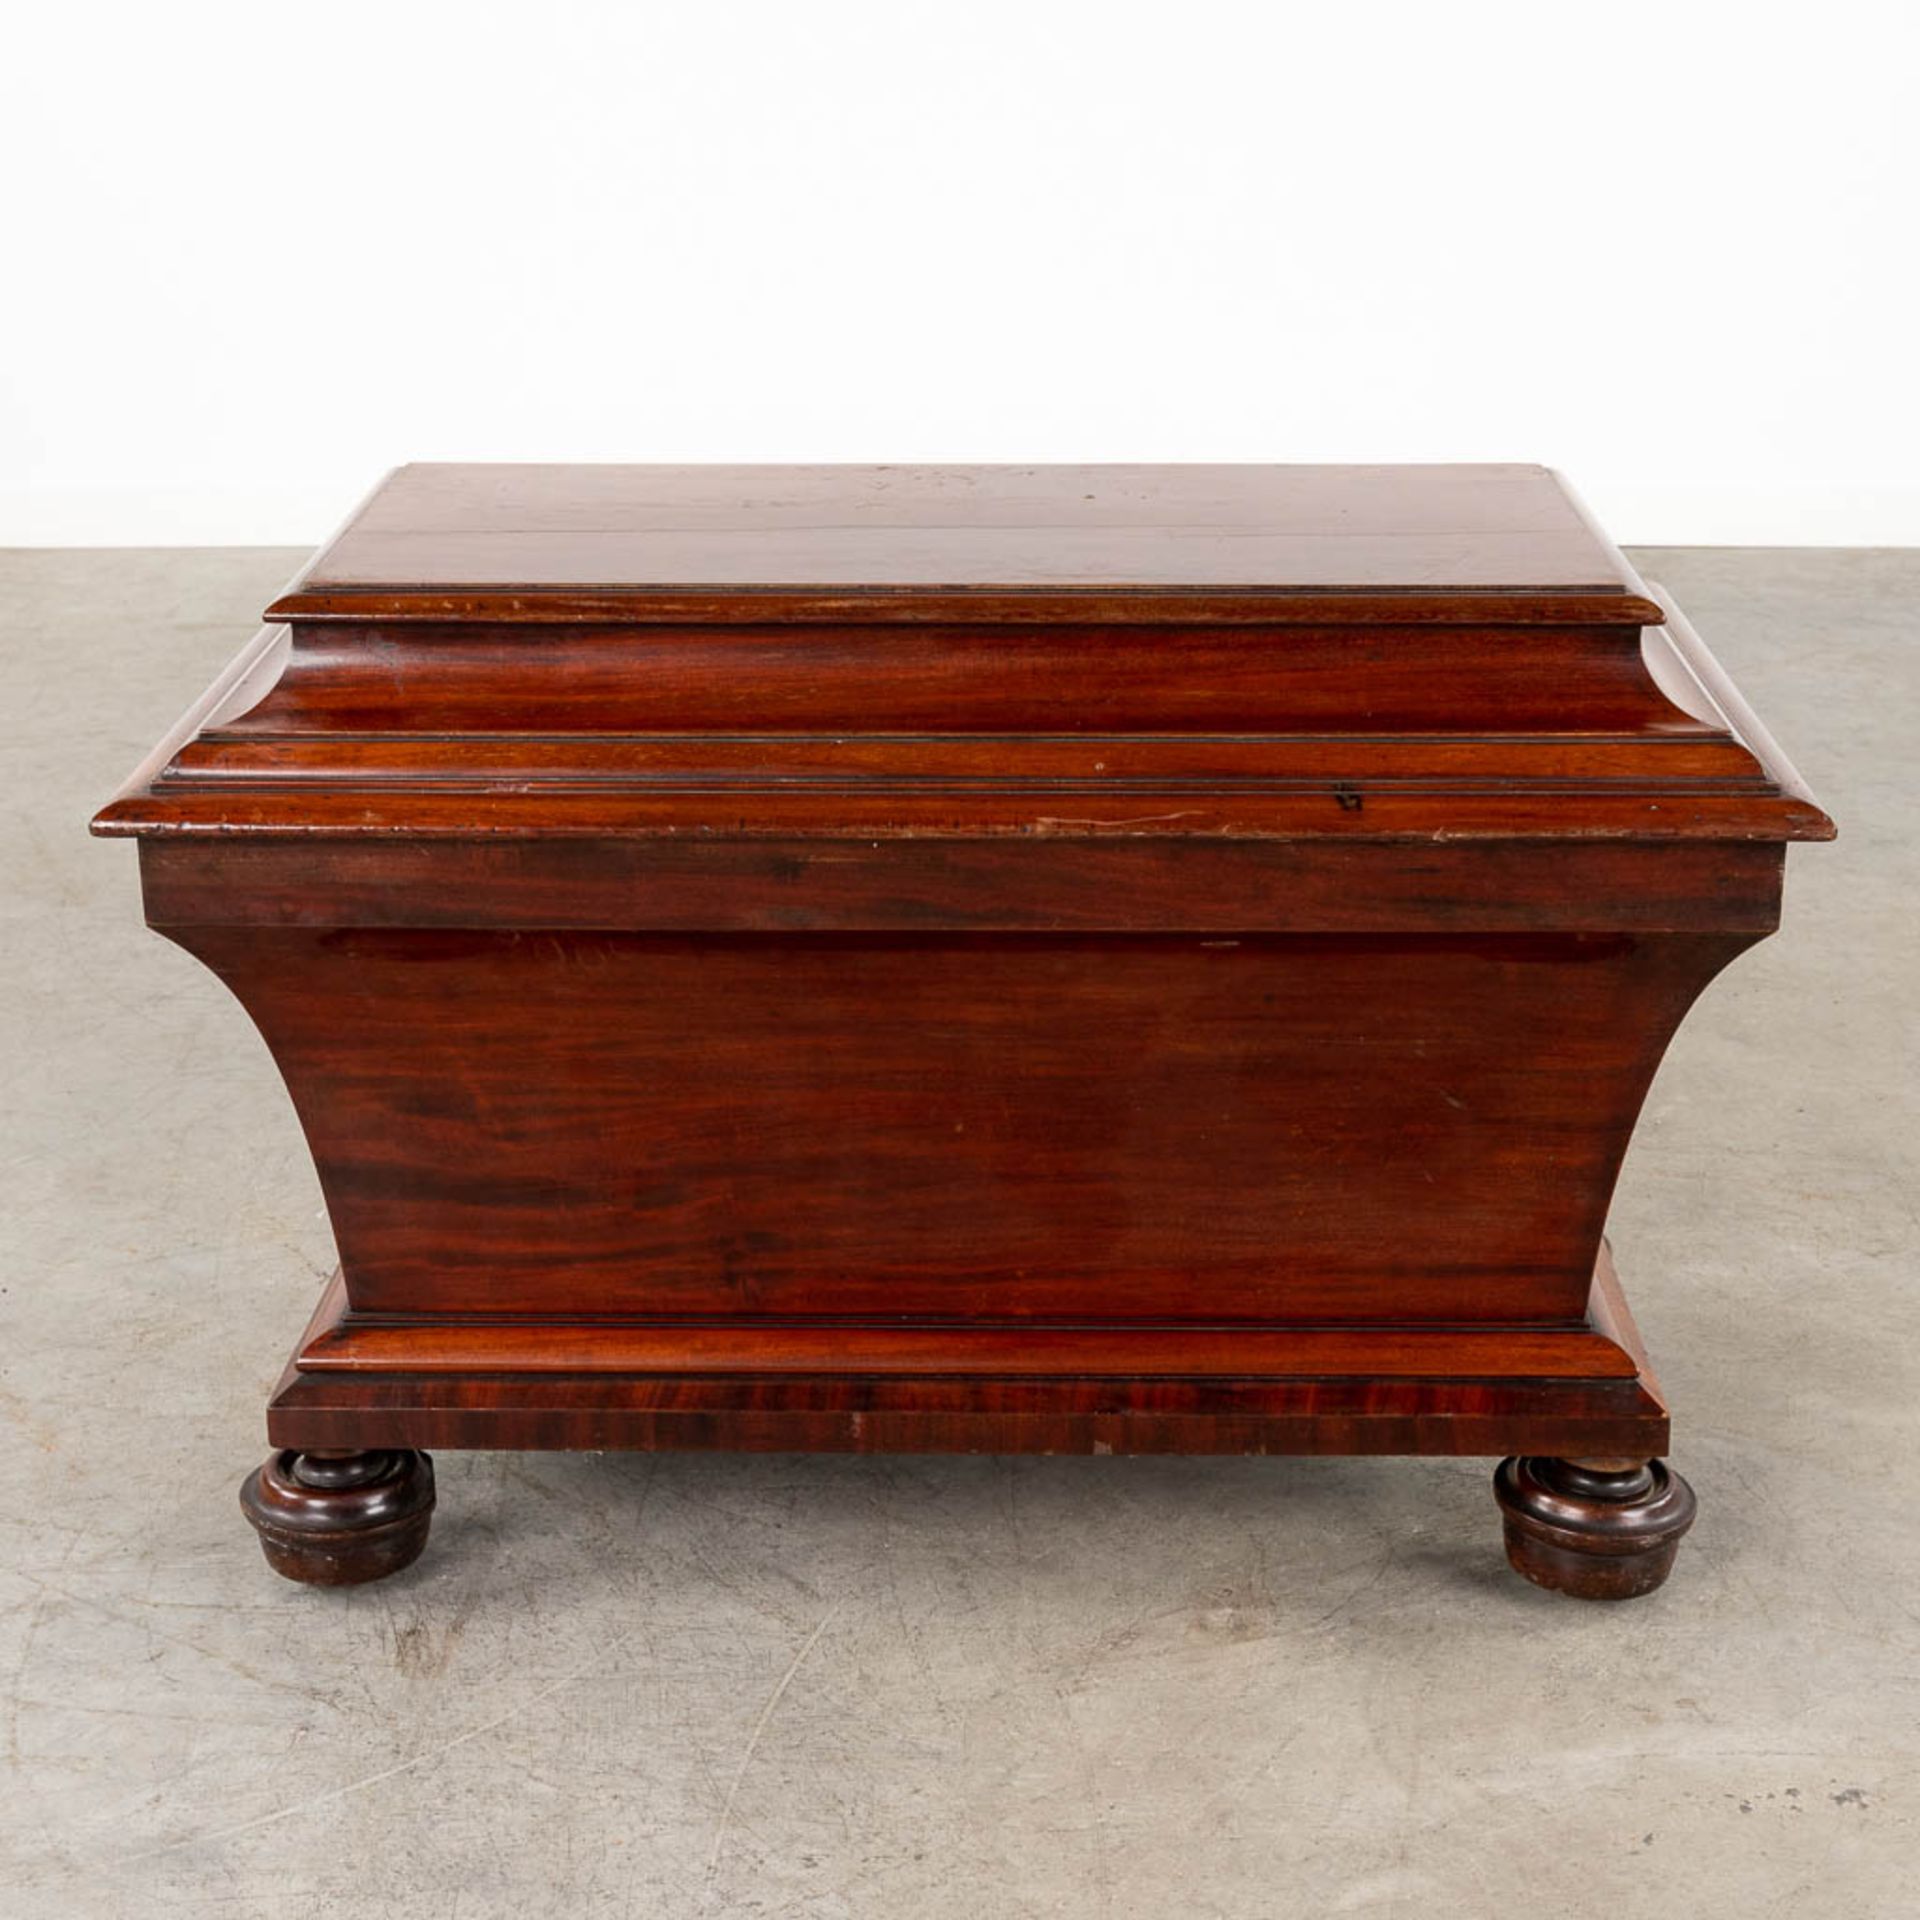 An exceptionally large English Cellarette or Wine Cooler, Mahogany, 19th C. (D:46 x W:79 x H:51 cm) - Image 8 of 13